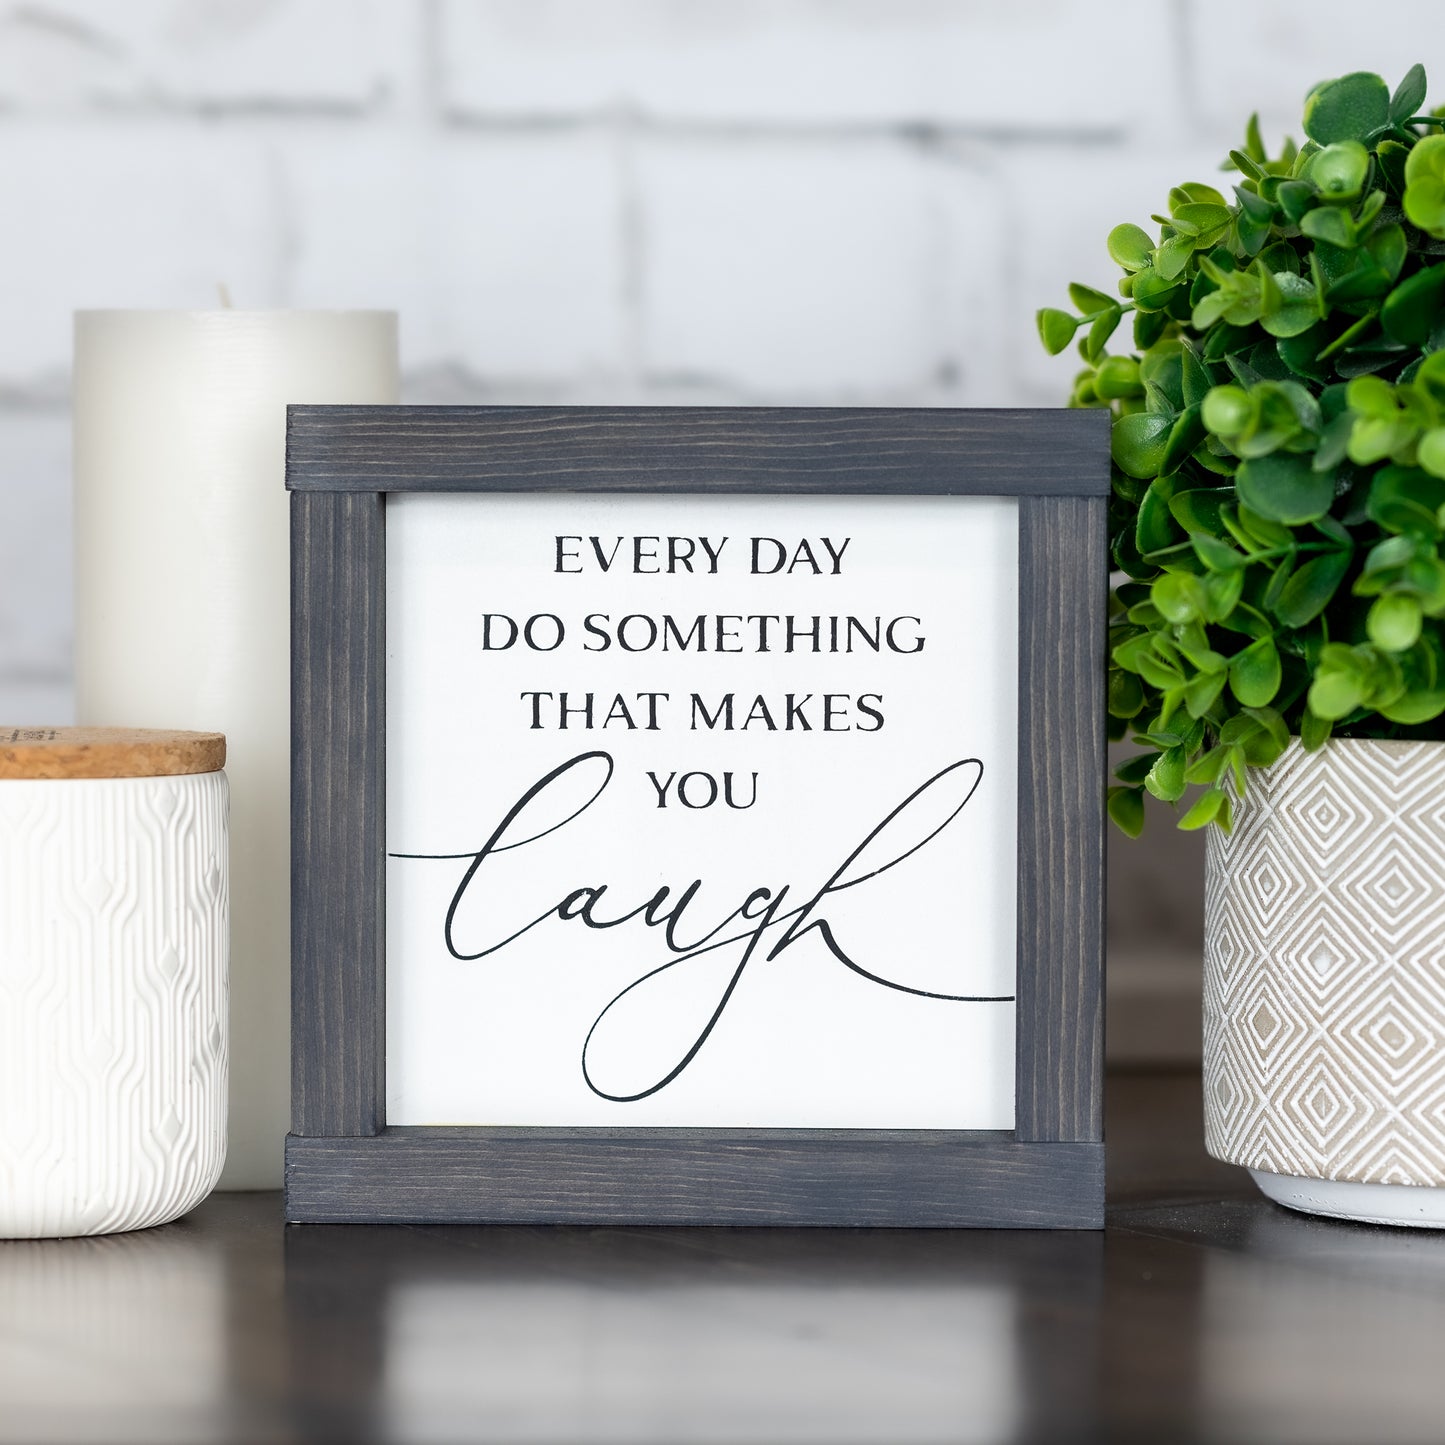 everyday do something that makes you laugh ~ mini sign